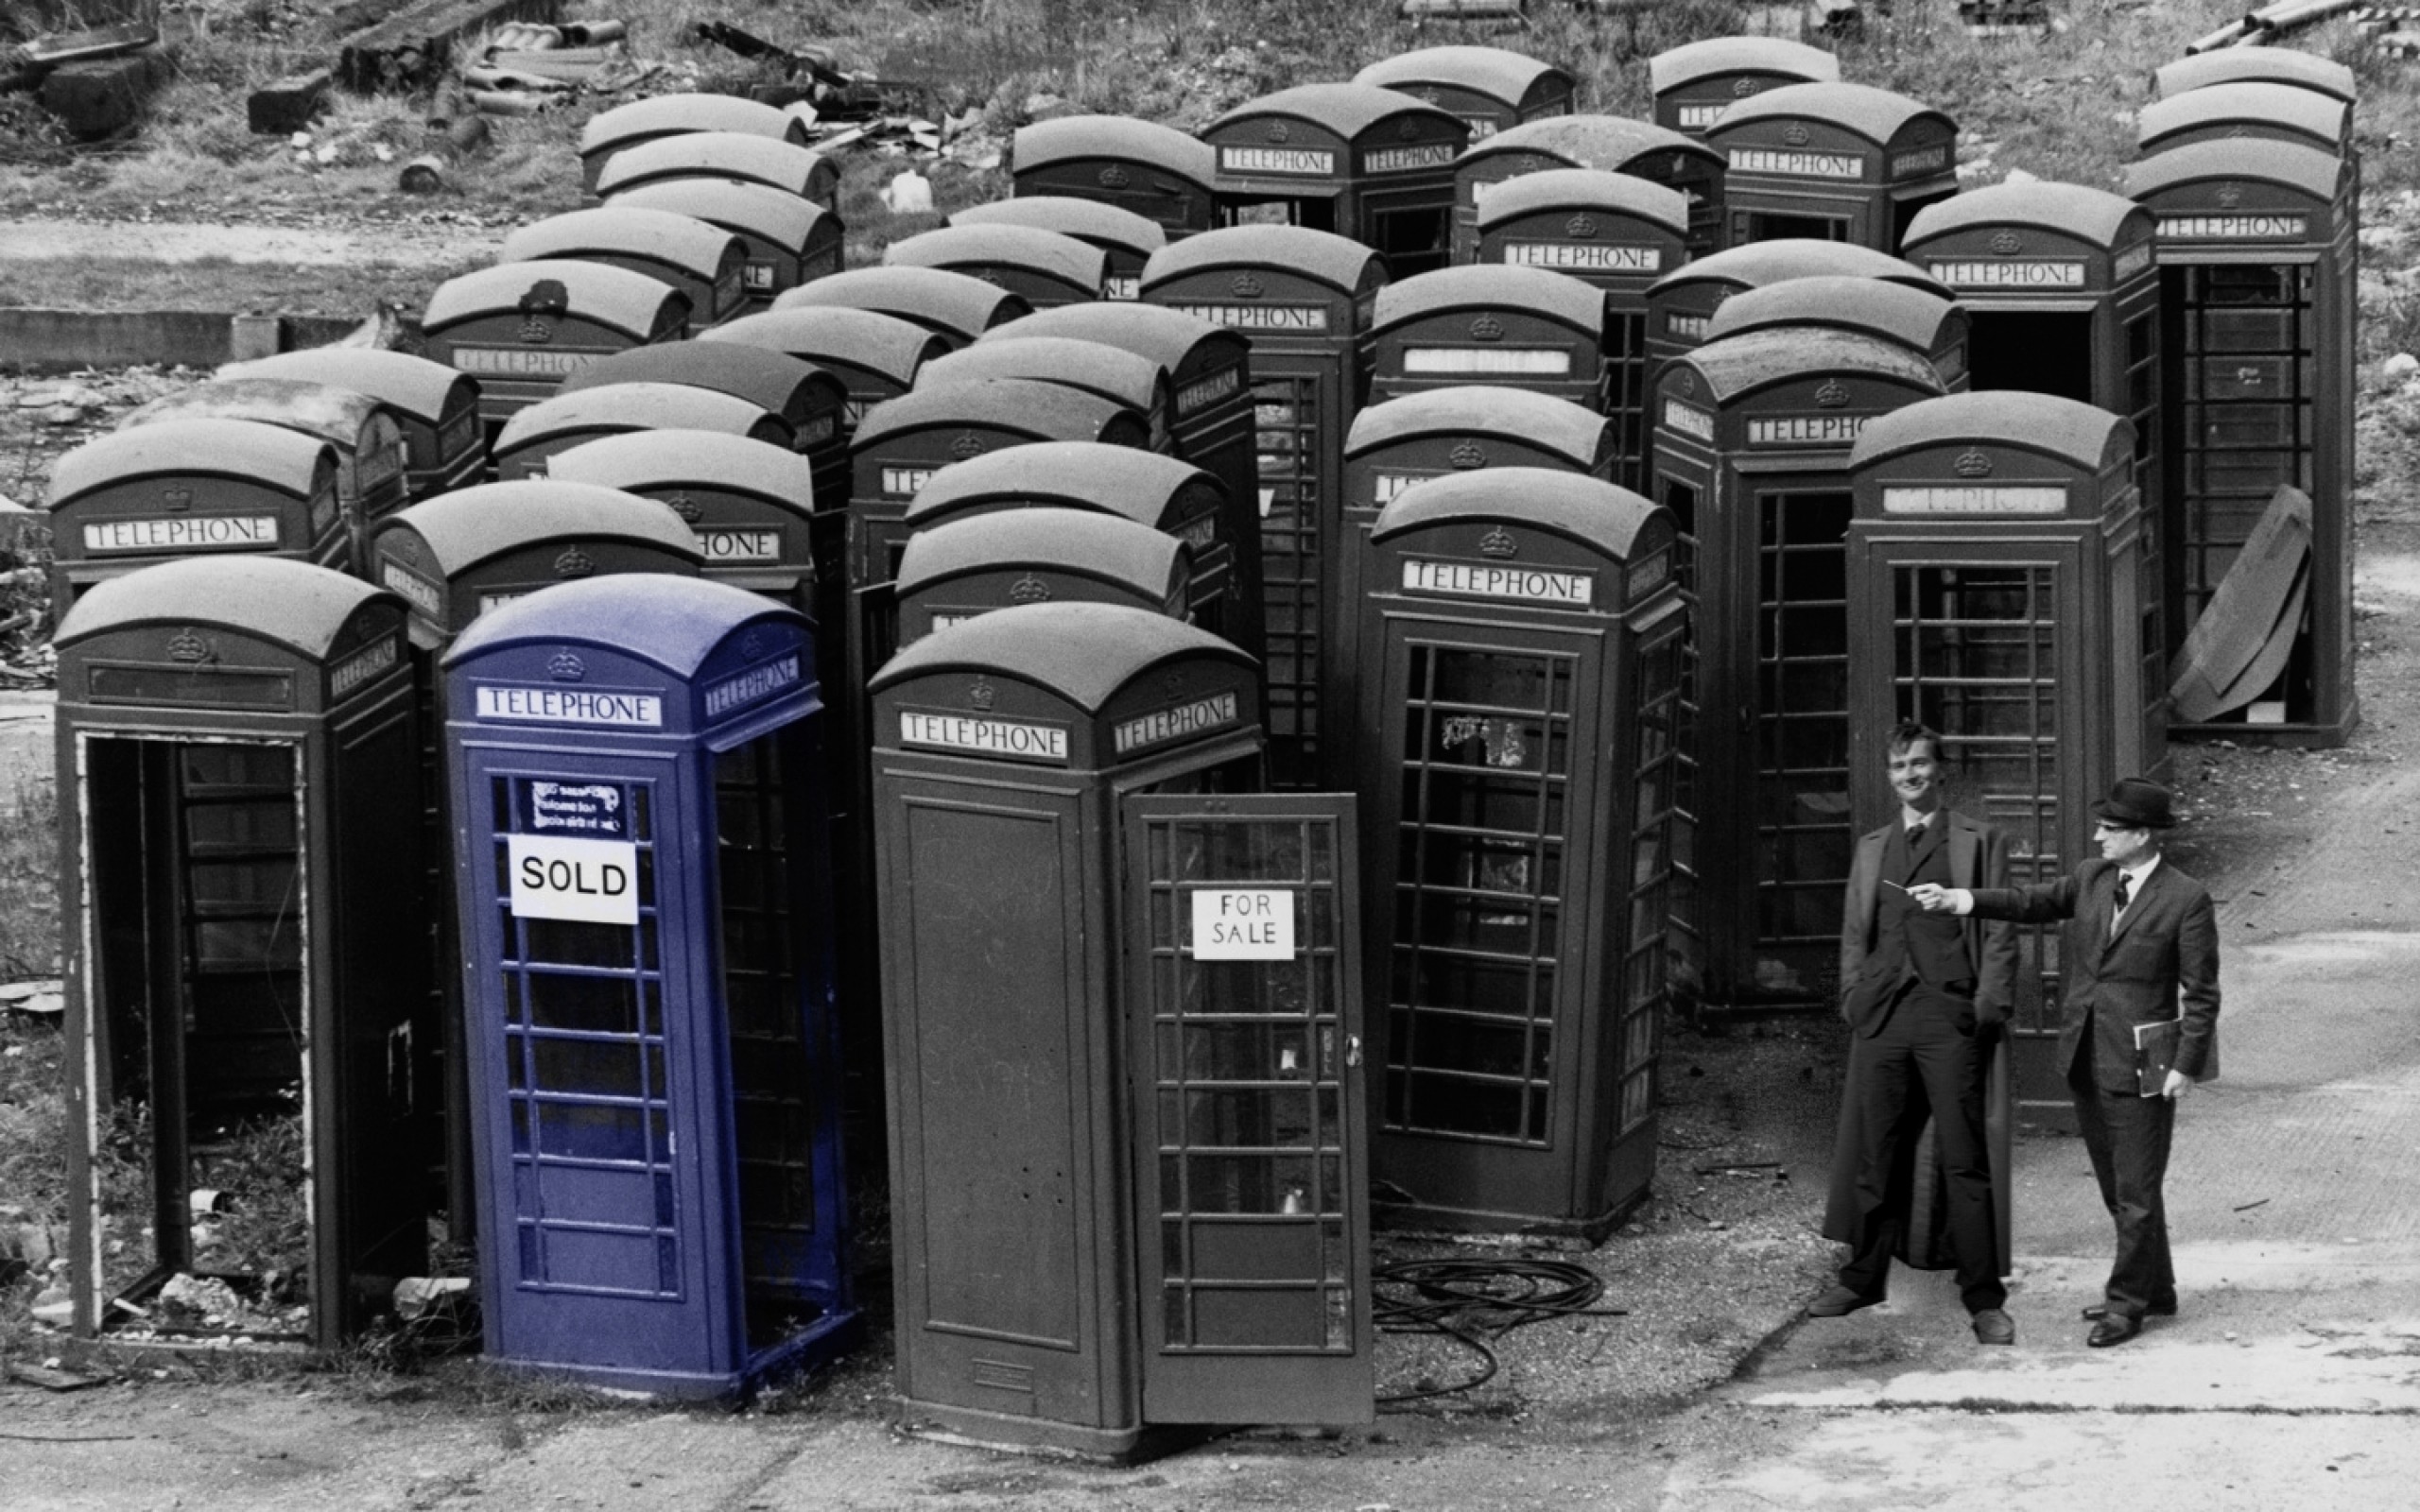 2560x1600 tardis david tennant doctor who selective coloring tenth doctor phone booth  1440x900 wallpaper Wallpaper HD